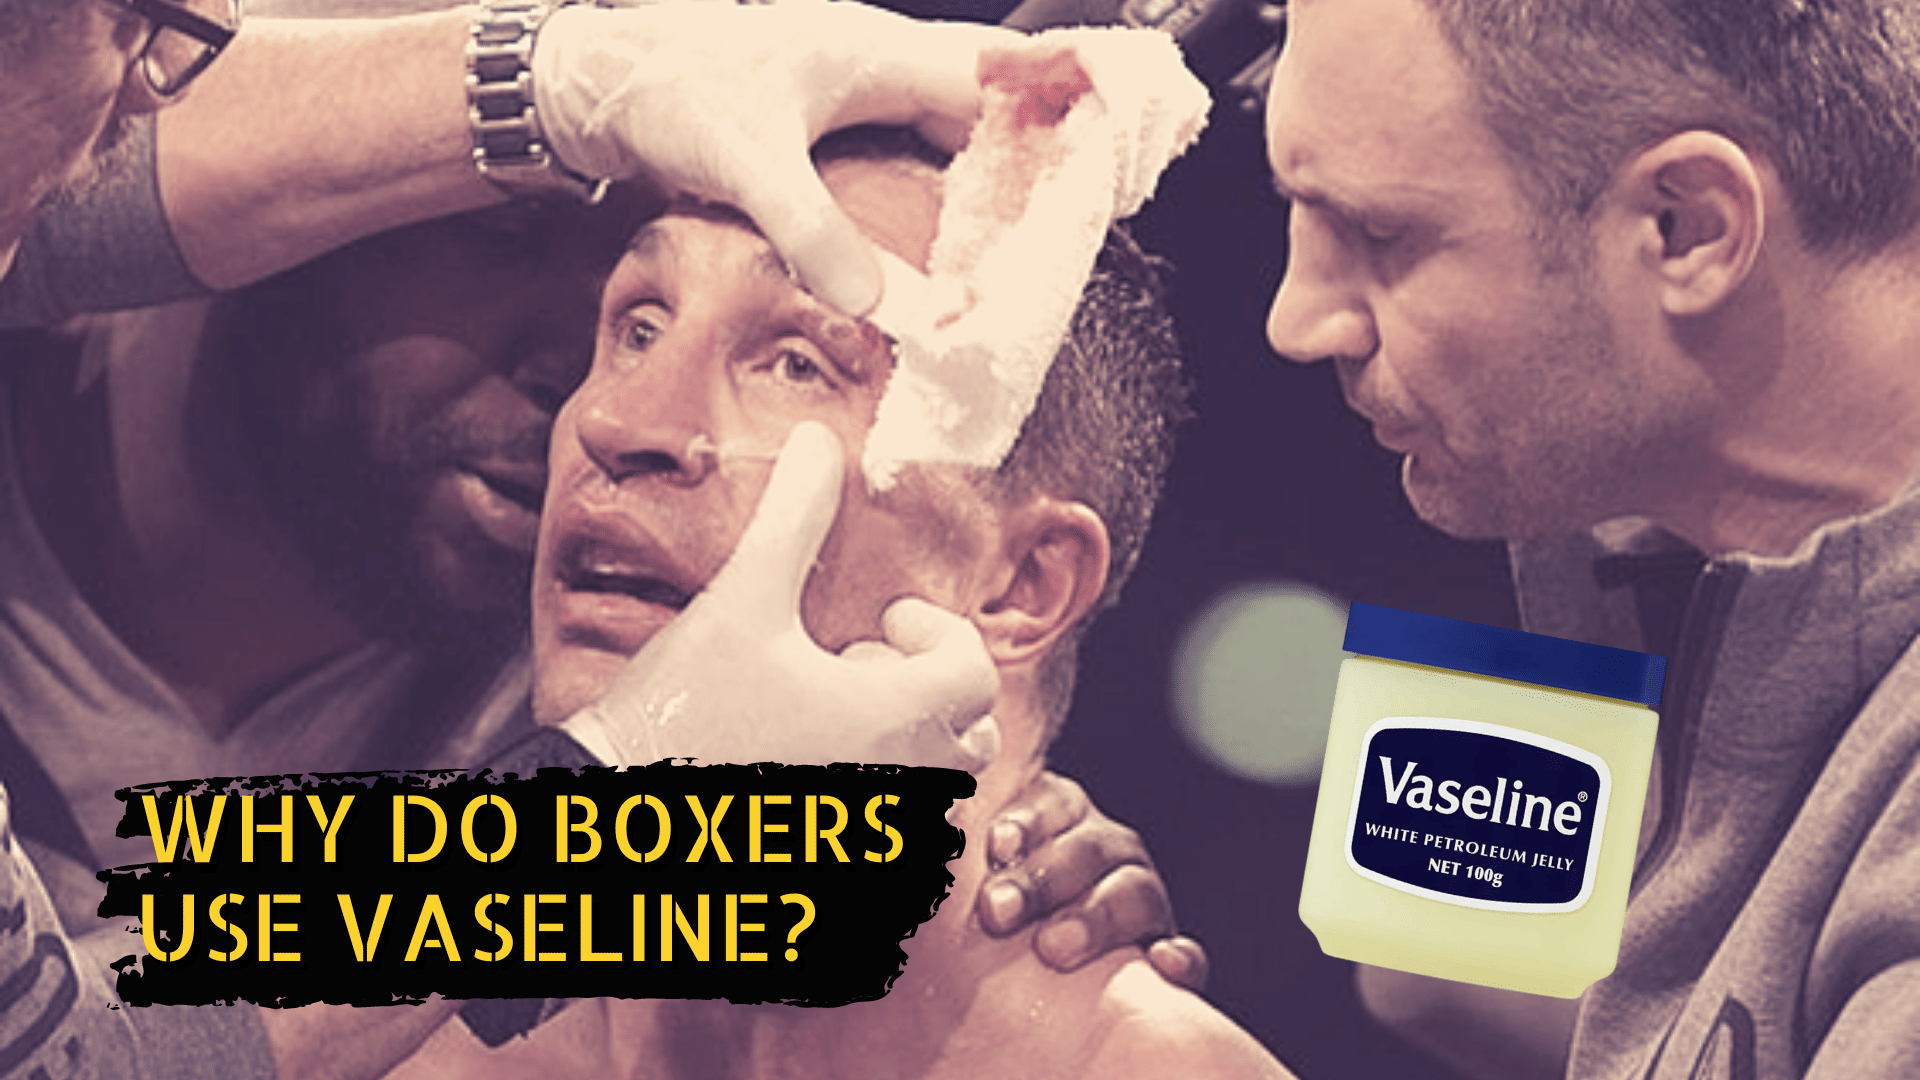 A boxer getting vaseline rubbed on his face